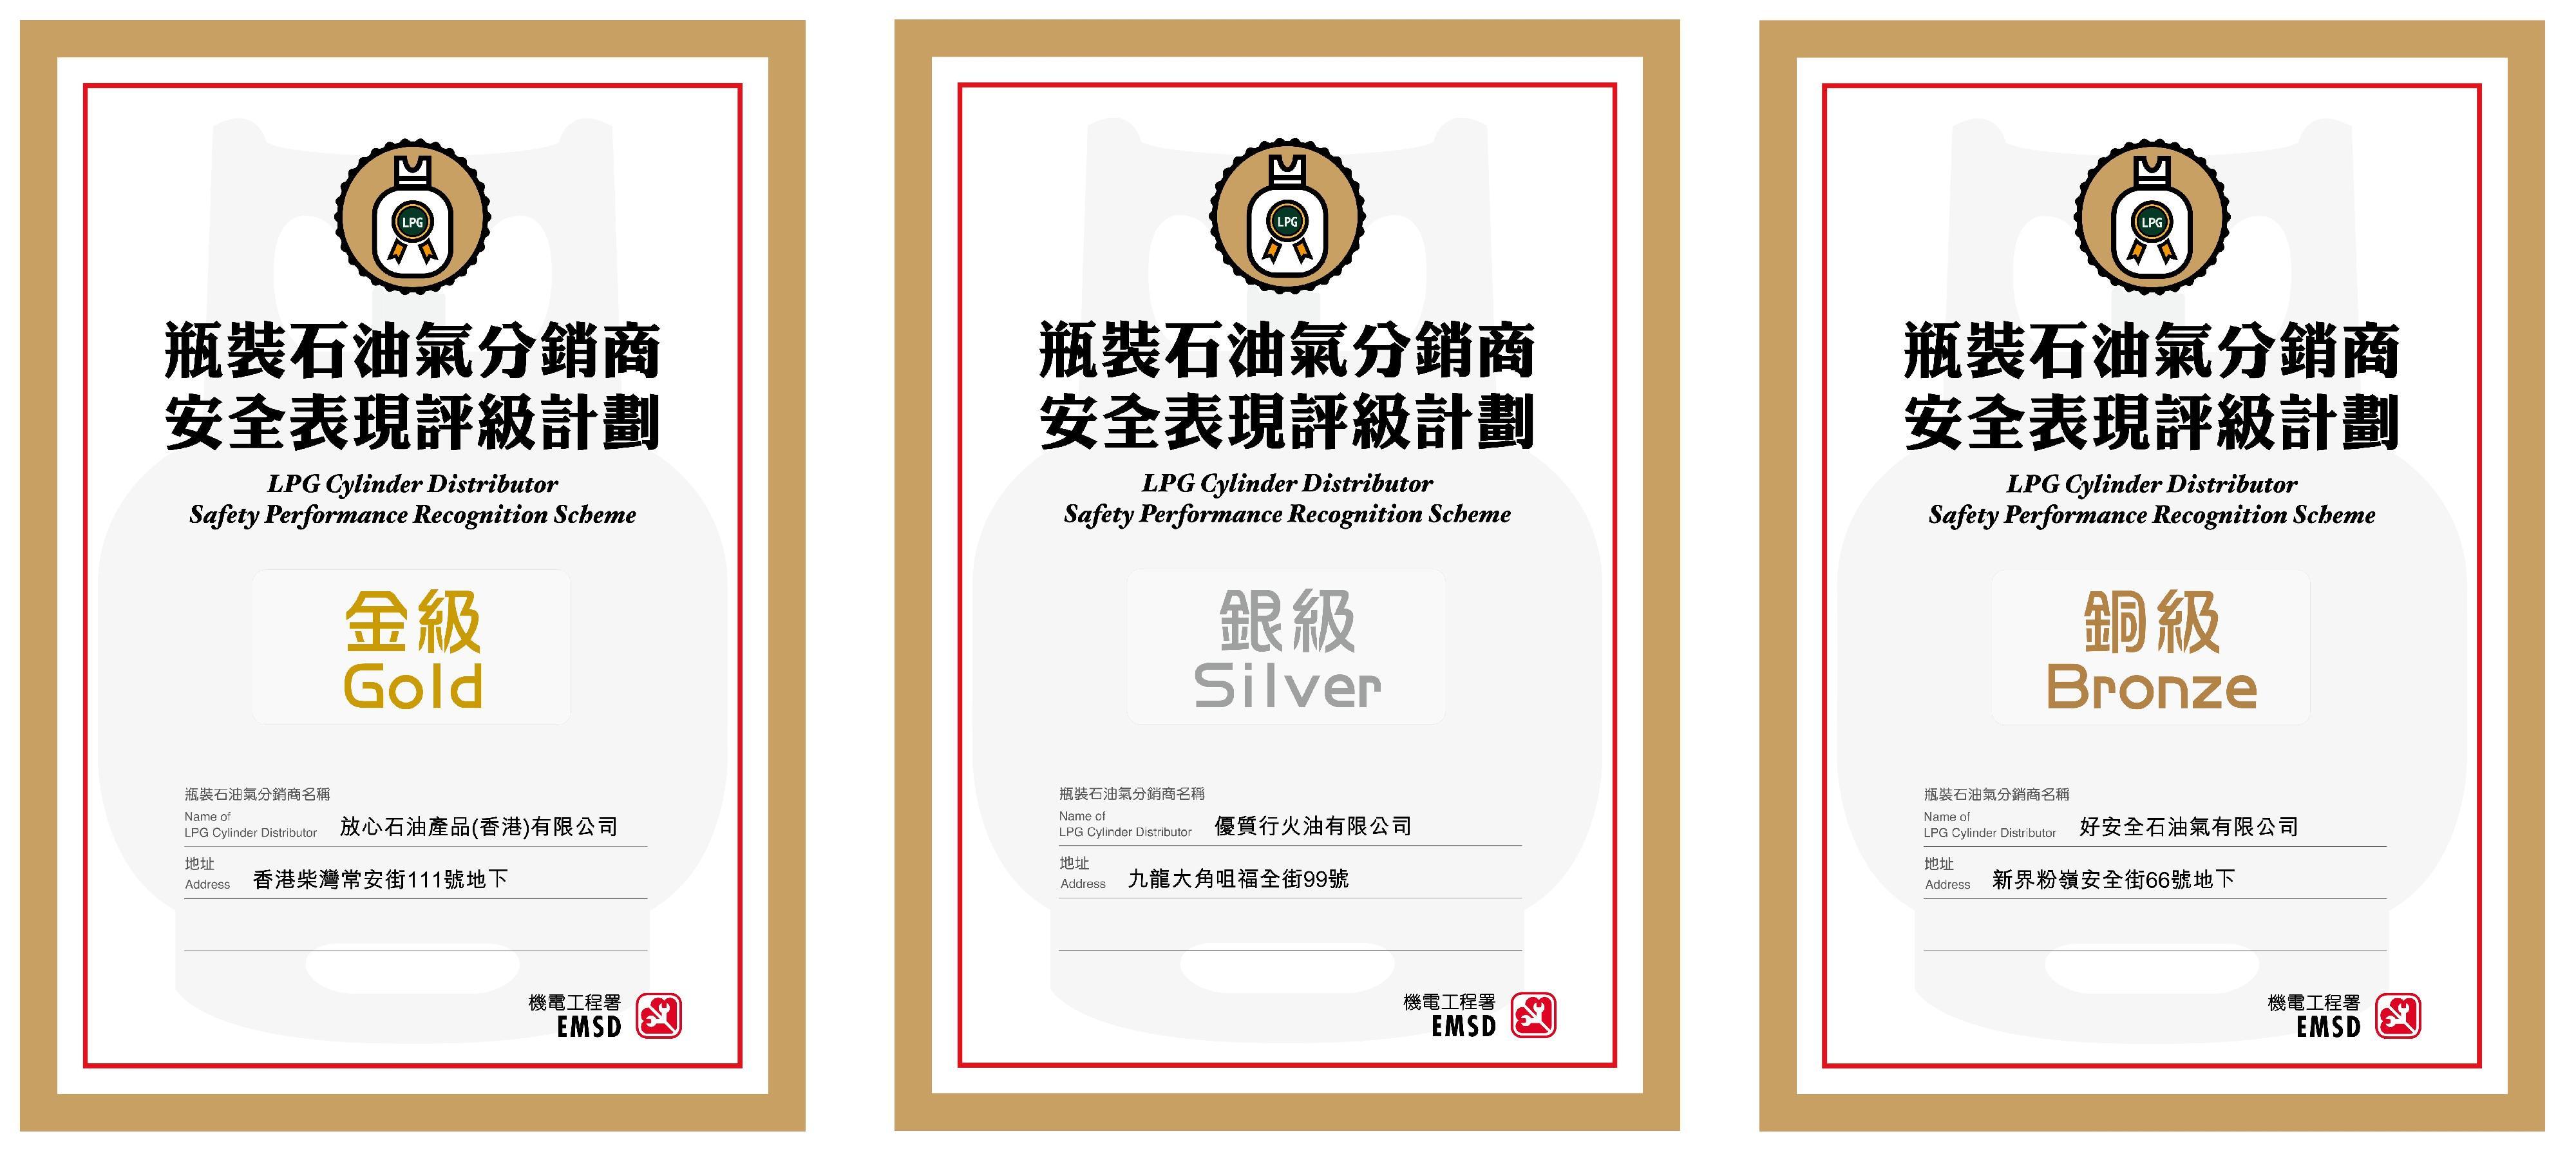 The Electrical and Mechanical Services Department announced today (March 28) the rating results of the Liquefied Petroleum Gas Cylinder Distributor Safety Performance Recognition Scheme for 2023. Picture shows the certificates of the gold, silver and bronze ratings which will be displayed by the distributors inside their shops.